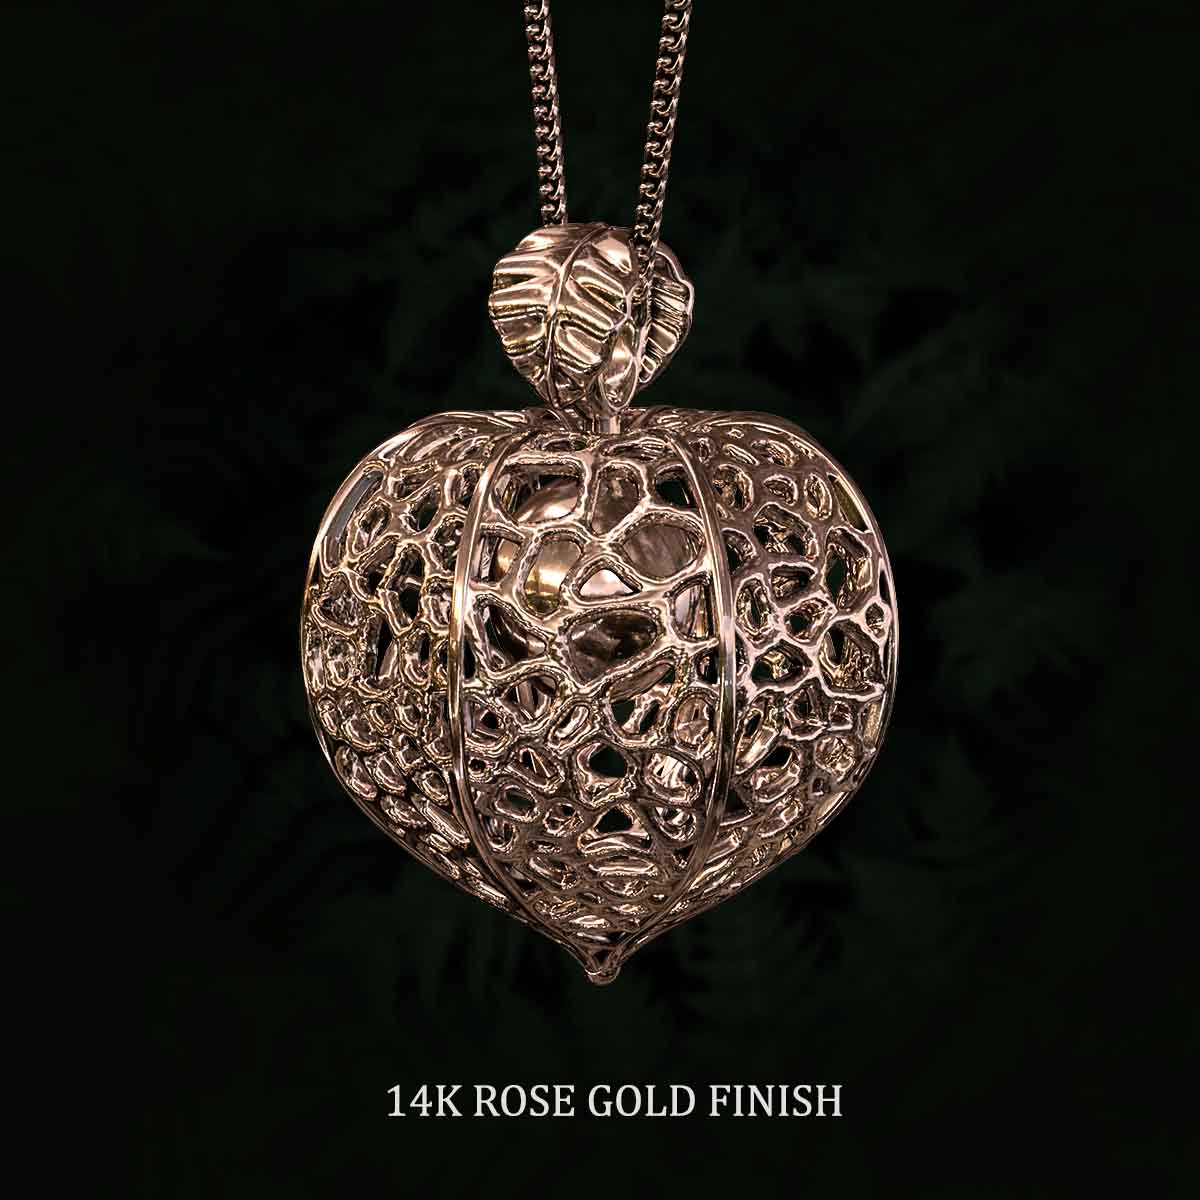 14k-Rose-Gold-Finish-Chinese-Lantern-Plant-Pendant-Jewelry-For-Necklace